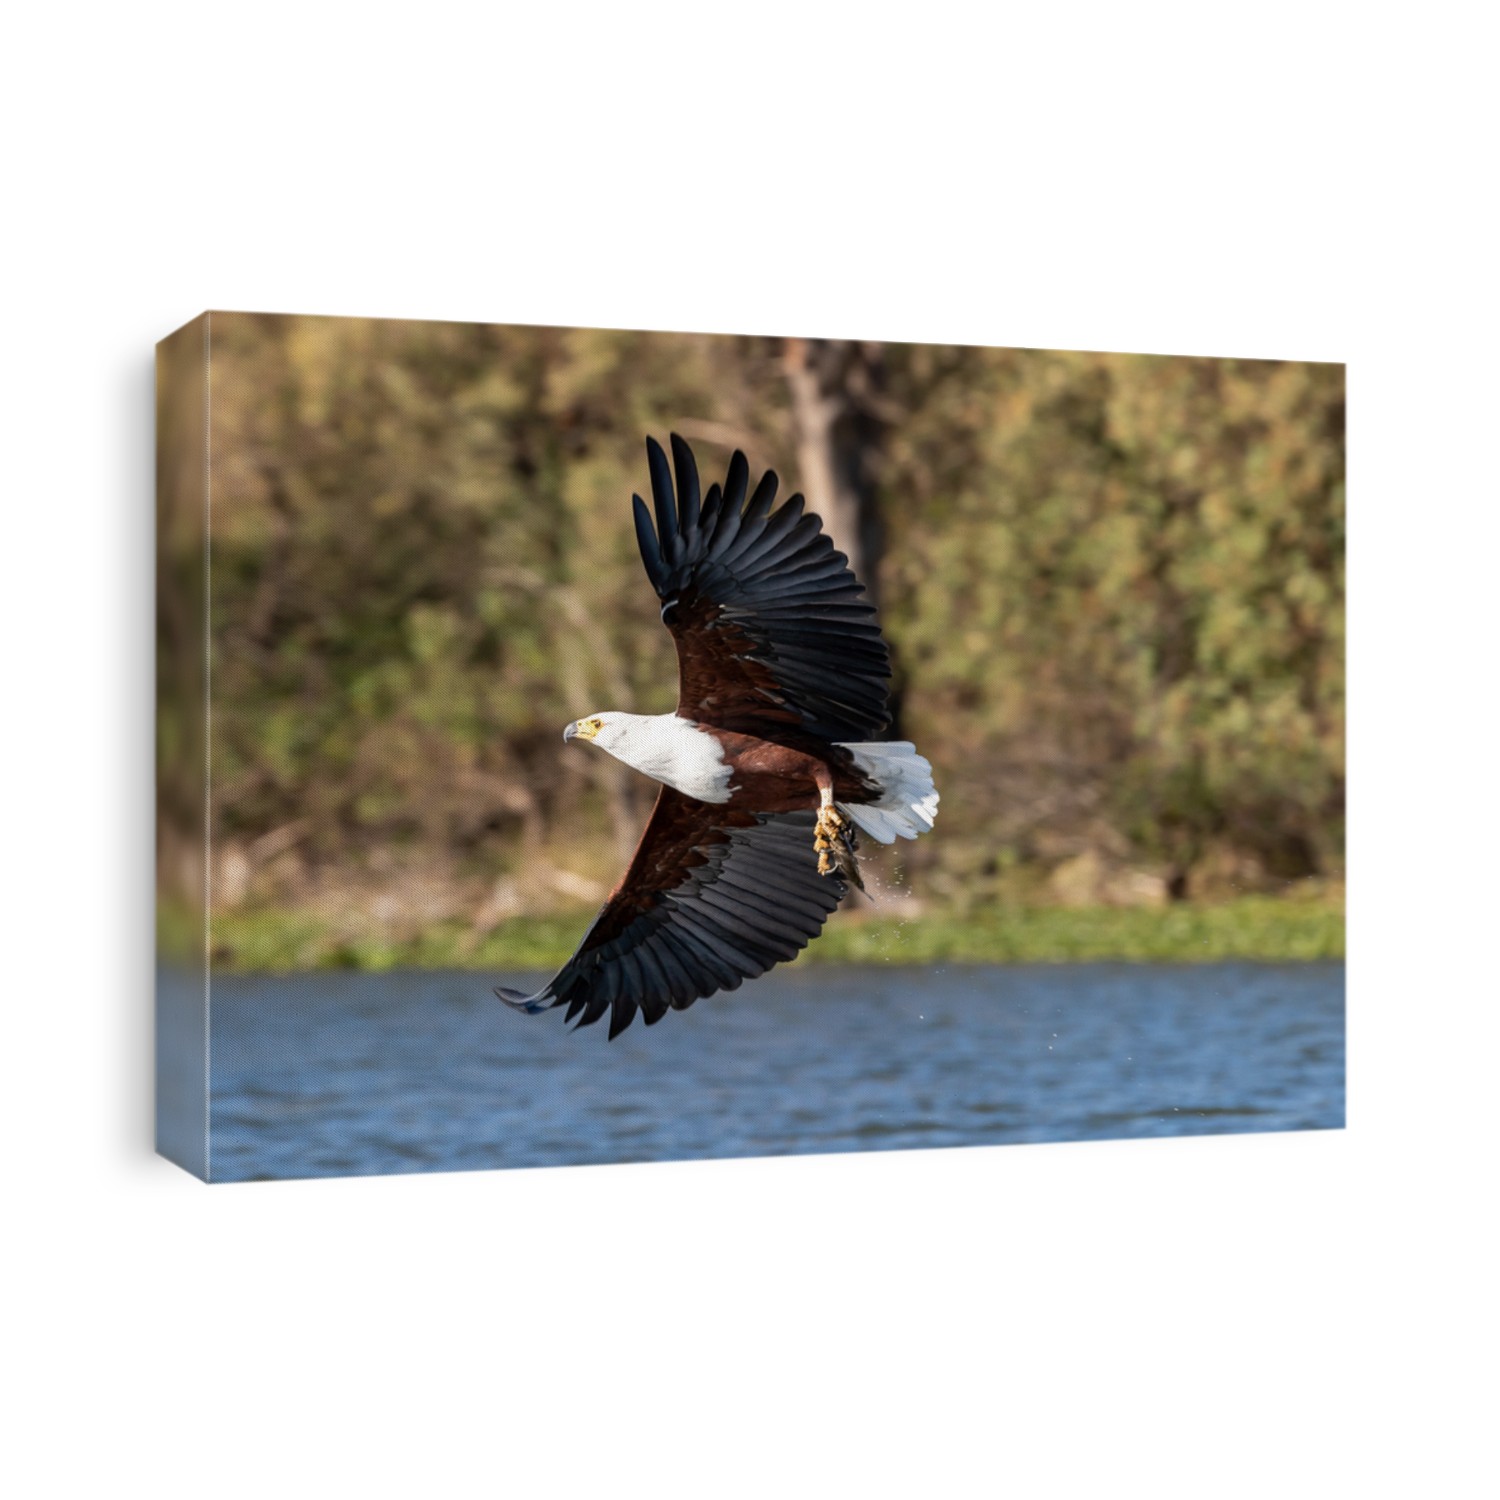 Fish eagle, Haliaeetus vocifer, catching a fish from the surface of Lake Naivasha, Kenya. These skilled predators will snatch fish from the water with their strong and sharp talons.